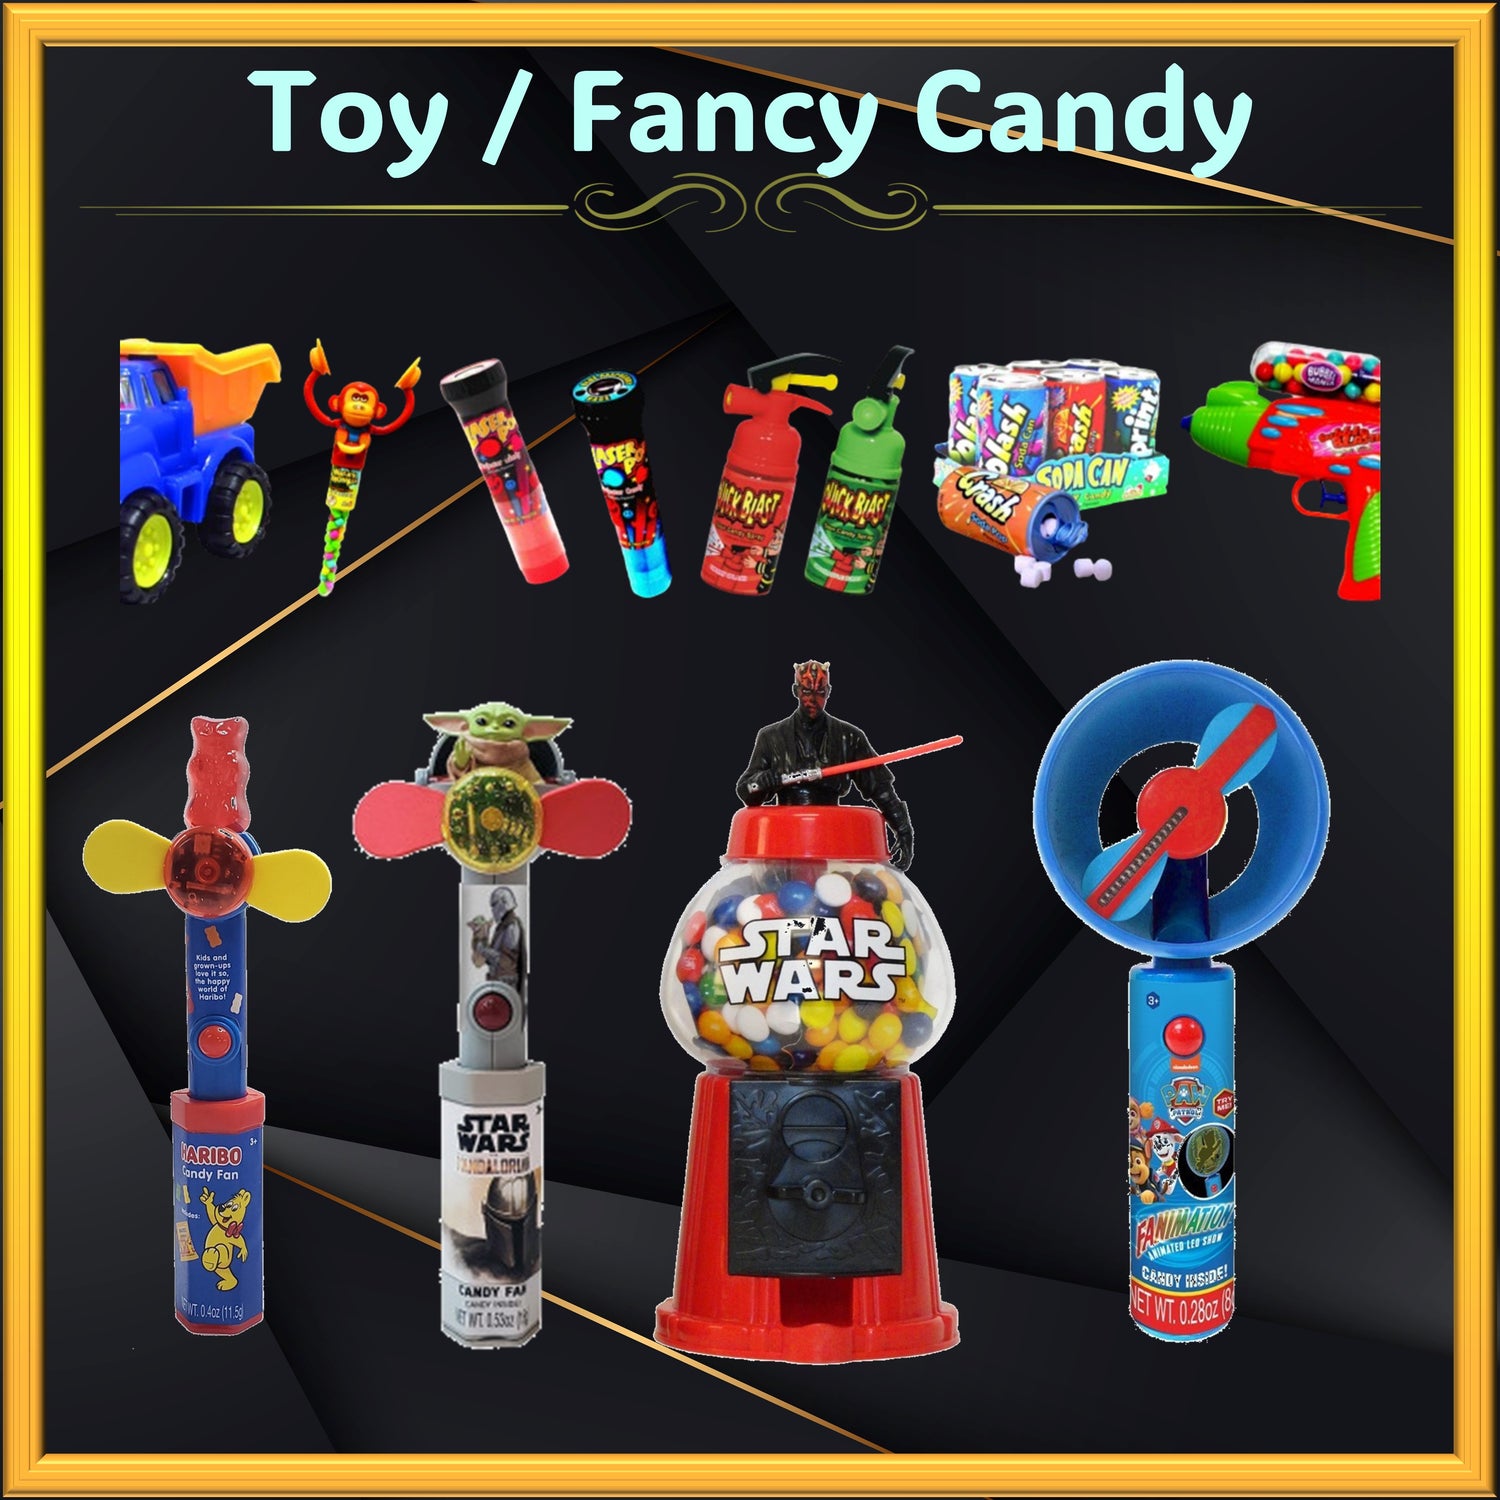 Toy/Fancy Candy